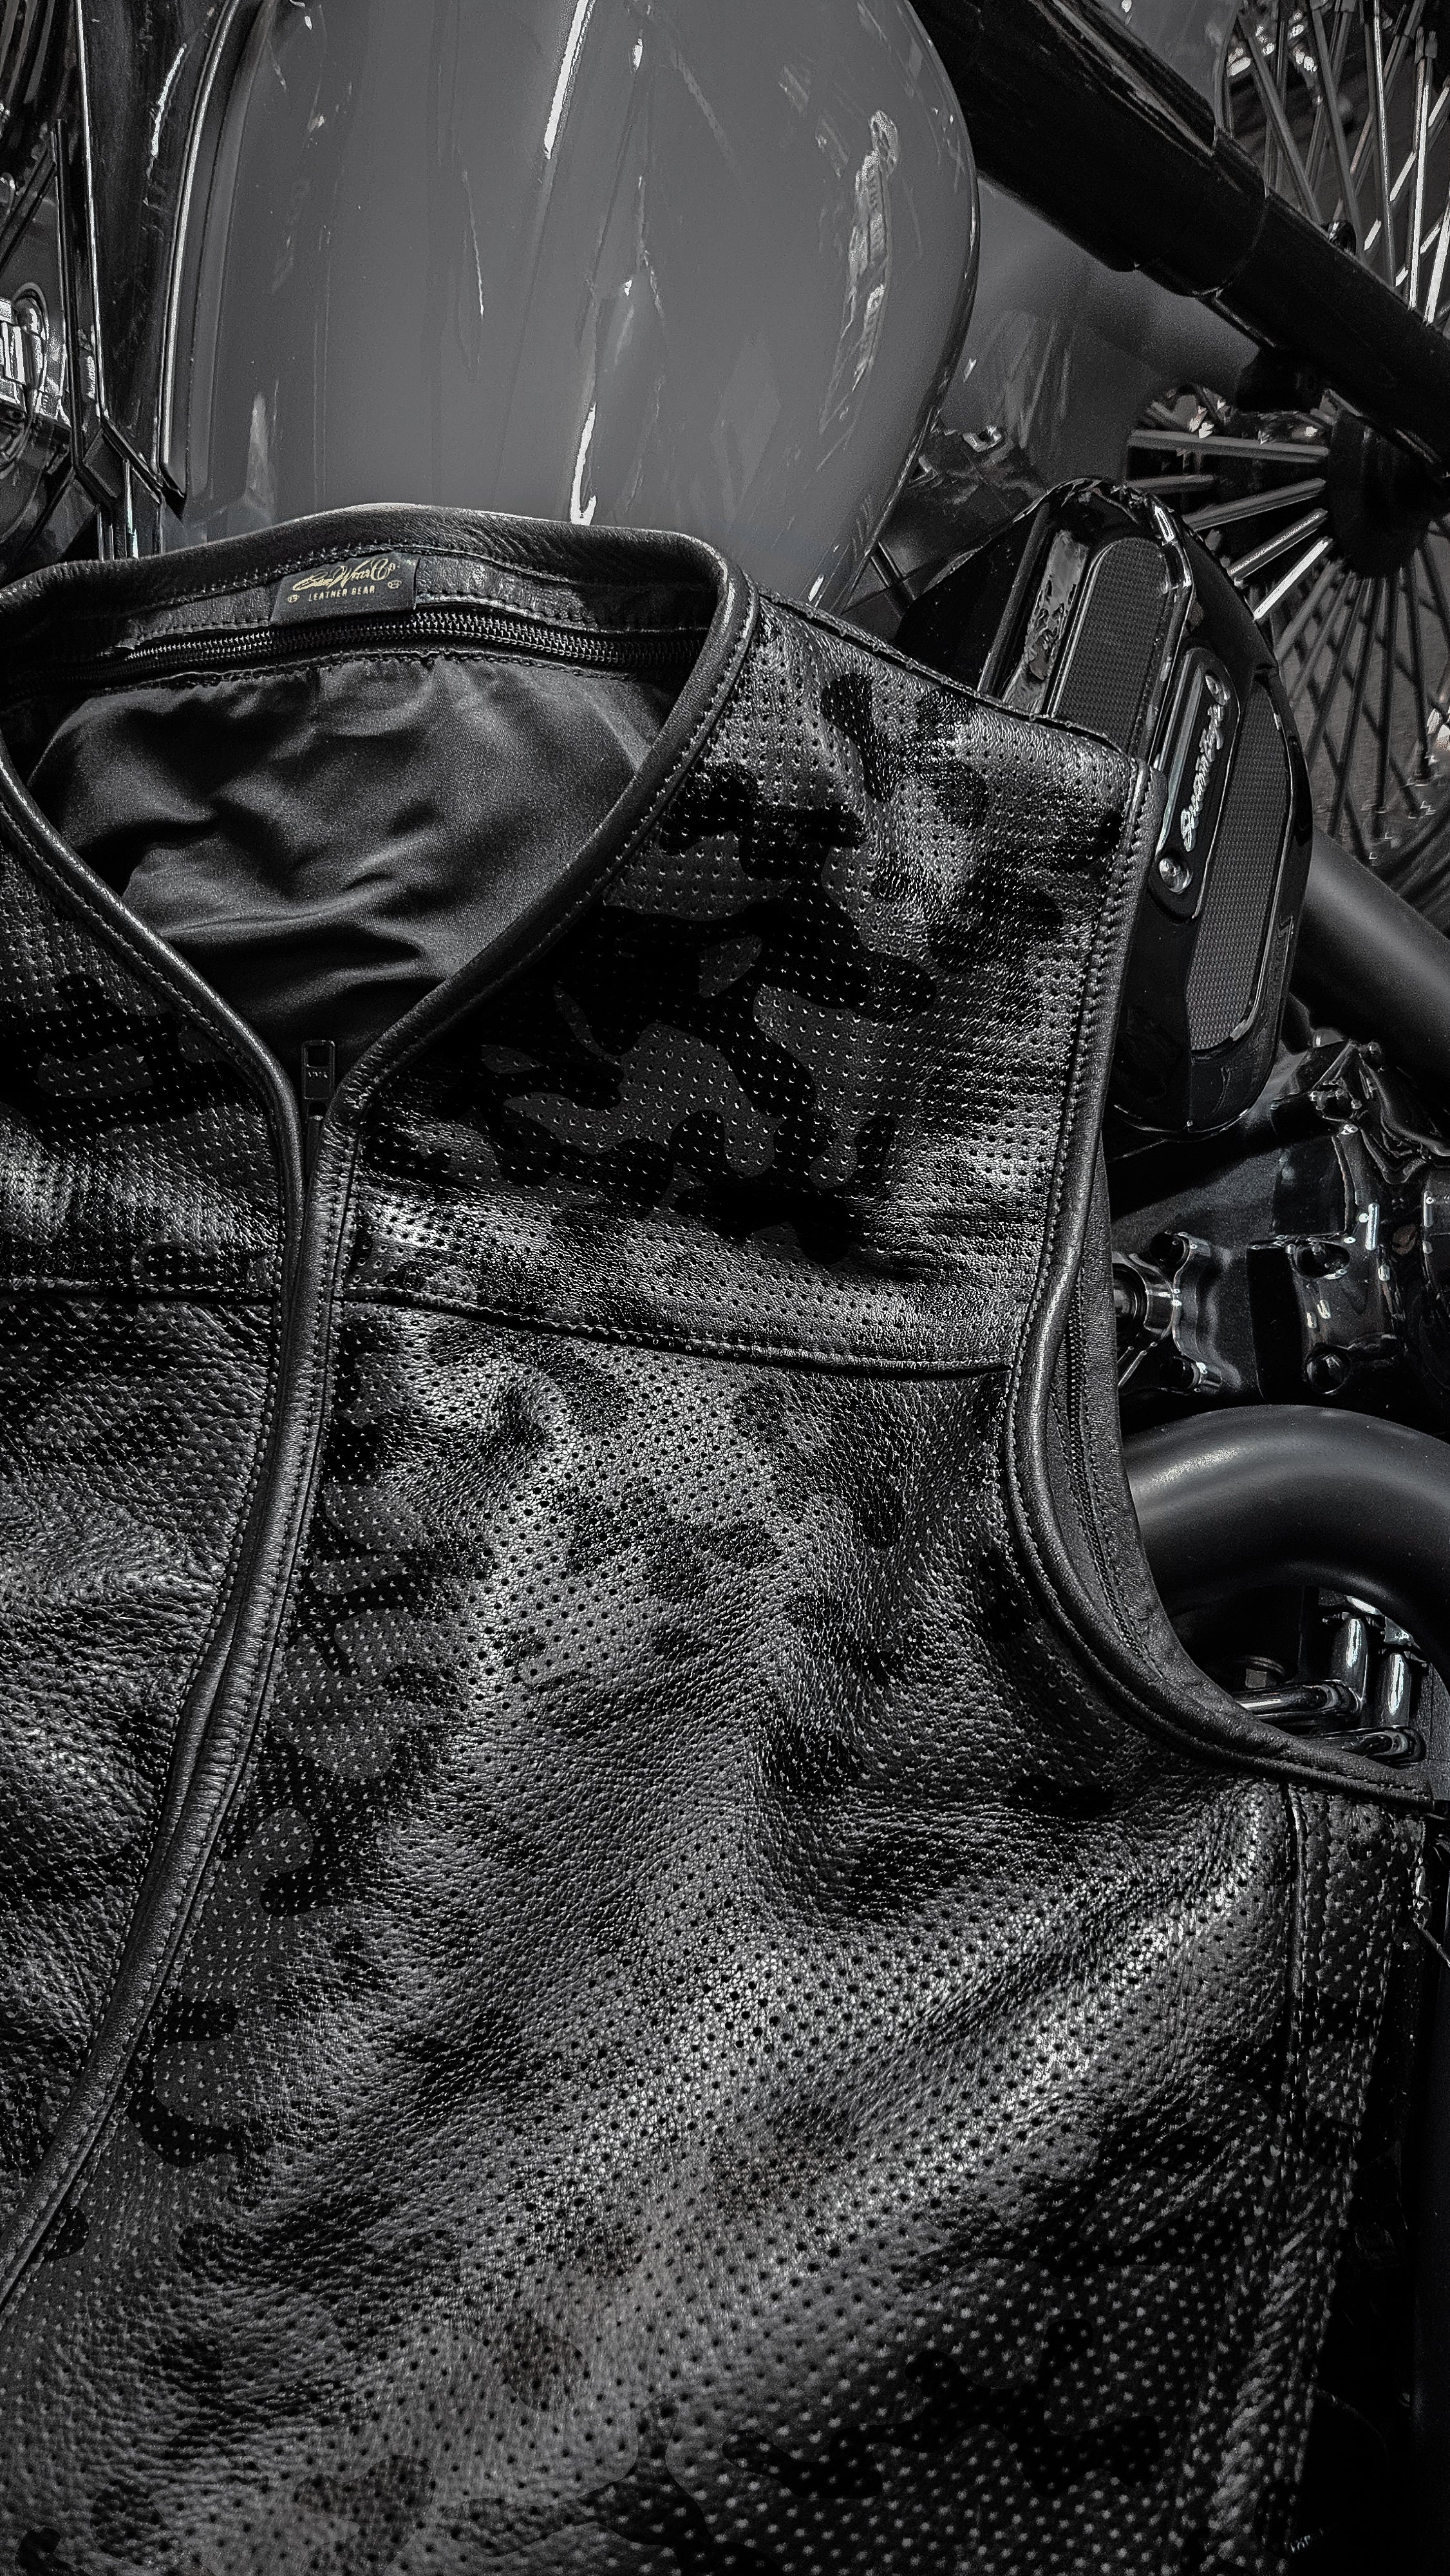 EURO "OFF THE RACK" PERFORATED BLACK OPS VEST